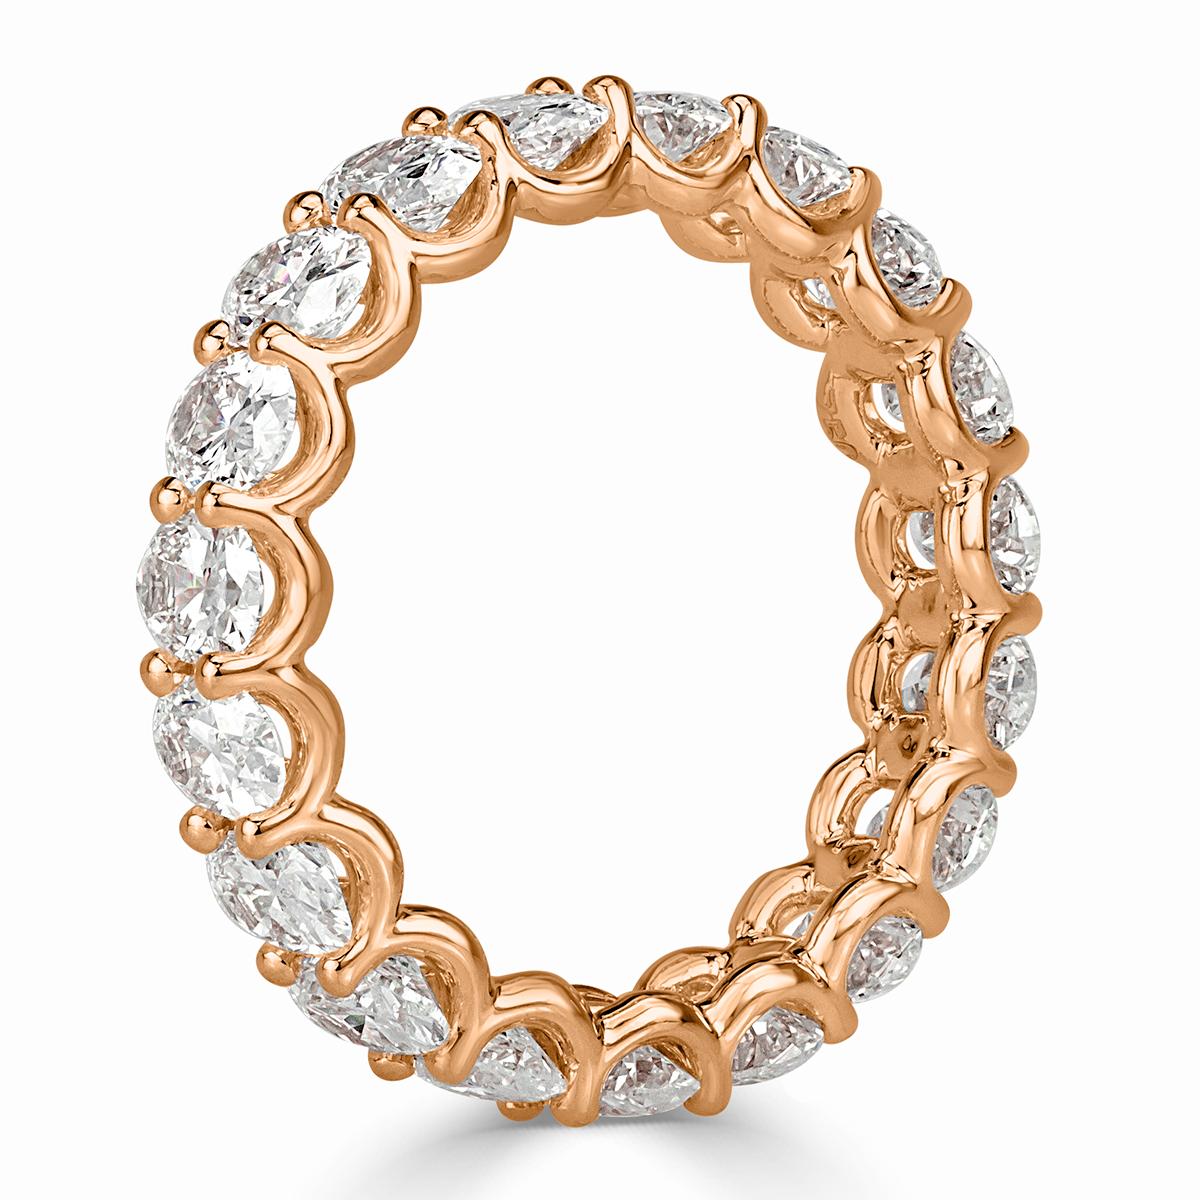 Handcrafted in an 18k rose gold, this divine diamond eternity band showcases 3.70ct of oval cut diamonds graded at E-F, VS1-VS2. The diamonds are set in a 